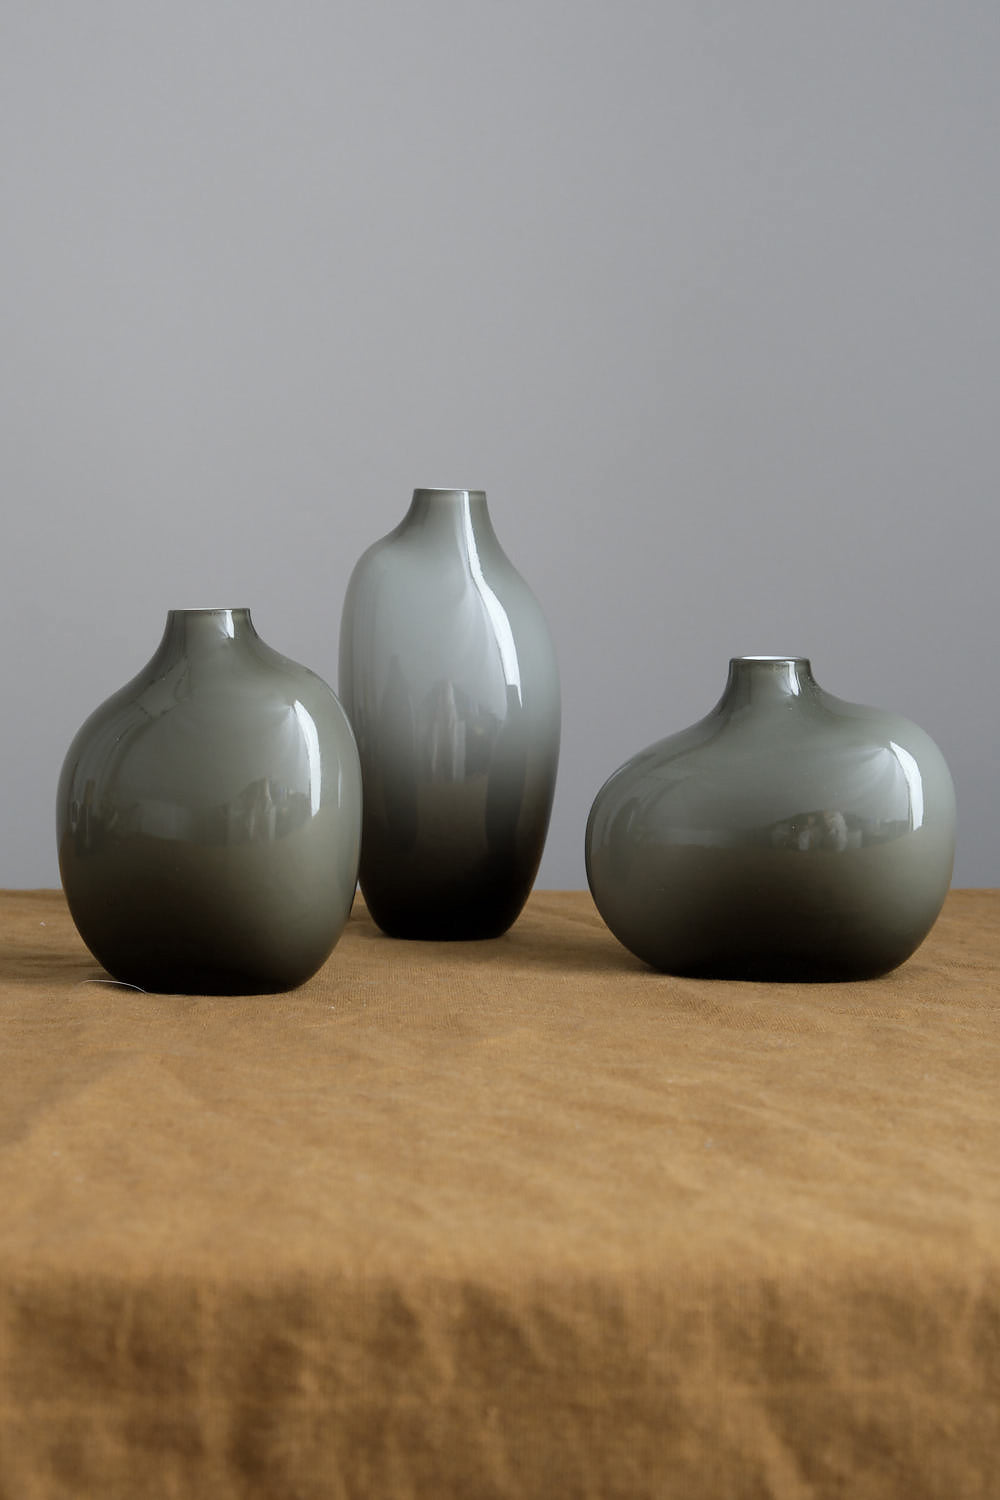 Various Sacco vases sttyled together